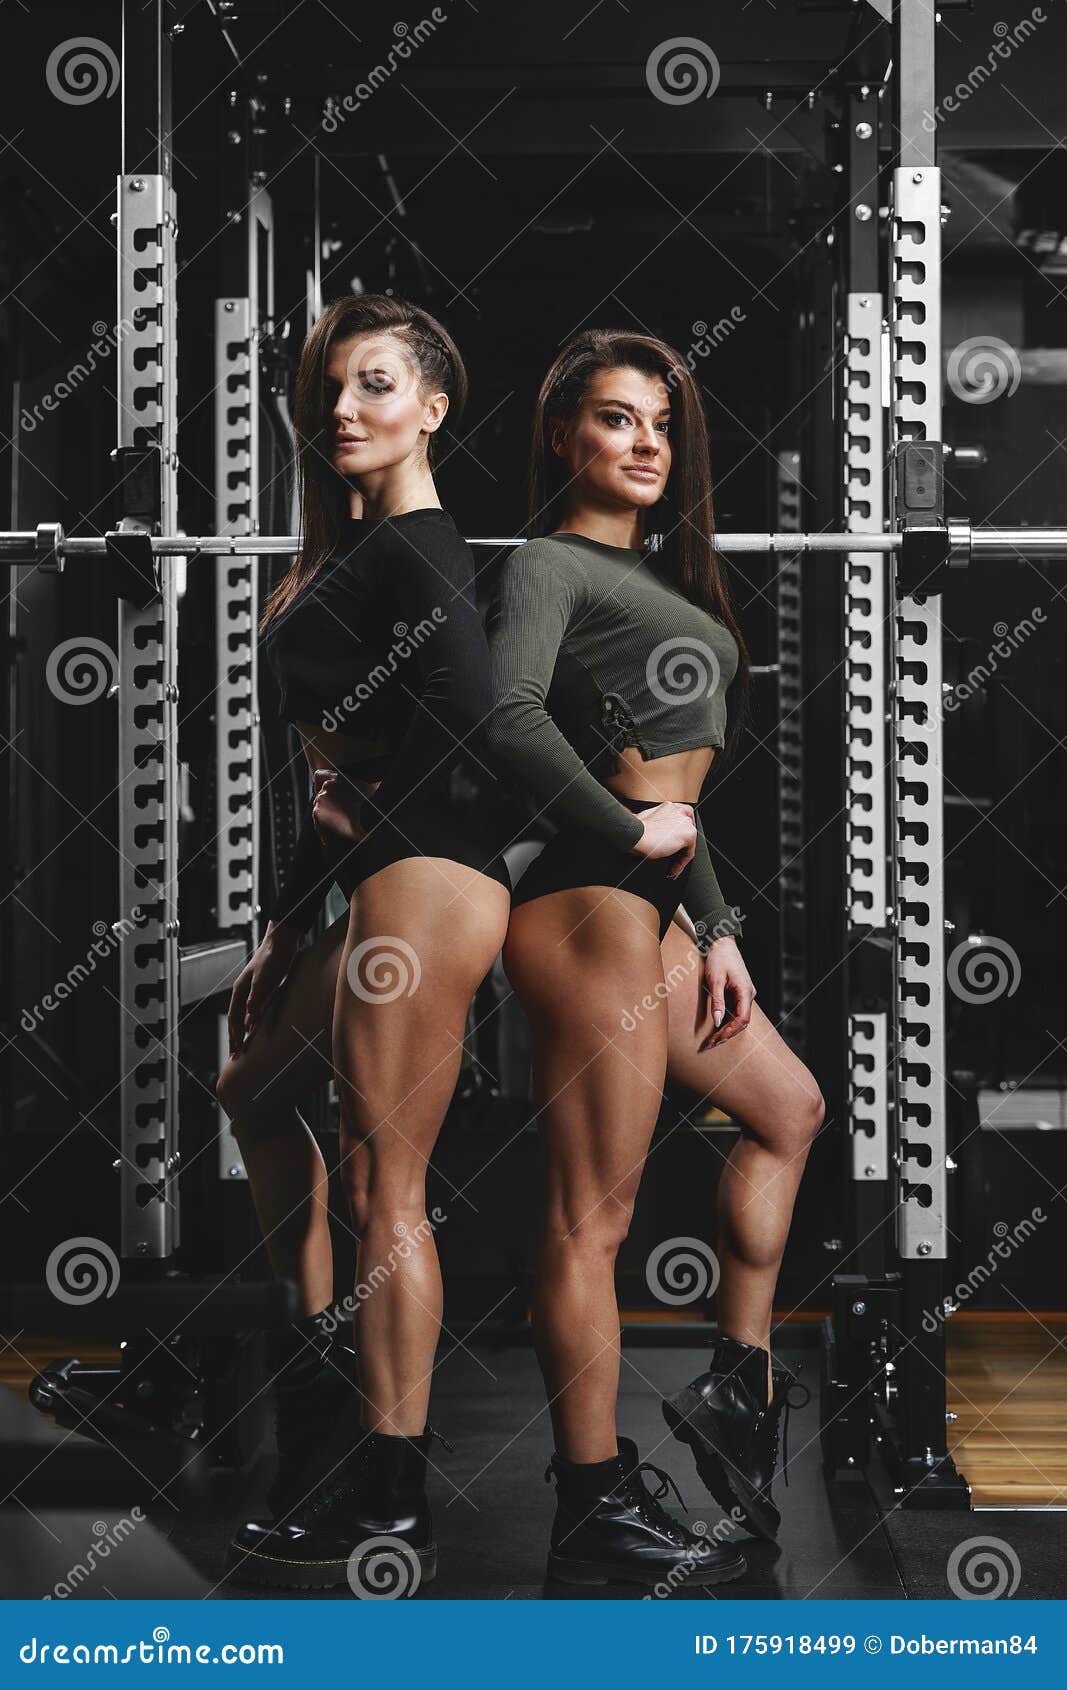 205 Two Workout Photos - Free Royalty-Free Stock Photos from Dreamstime